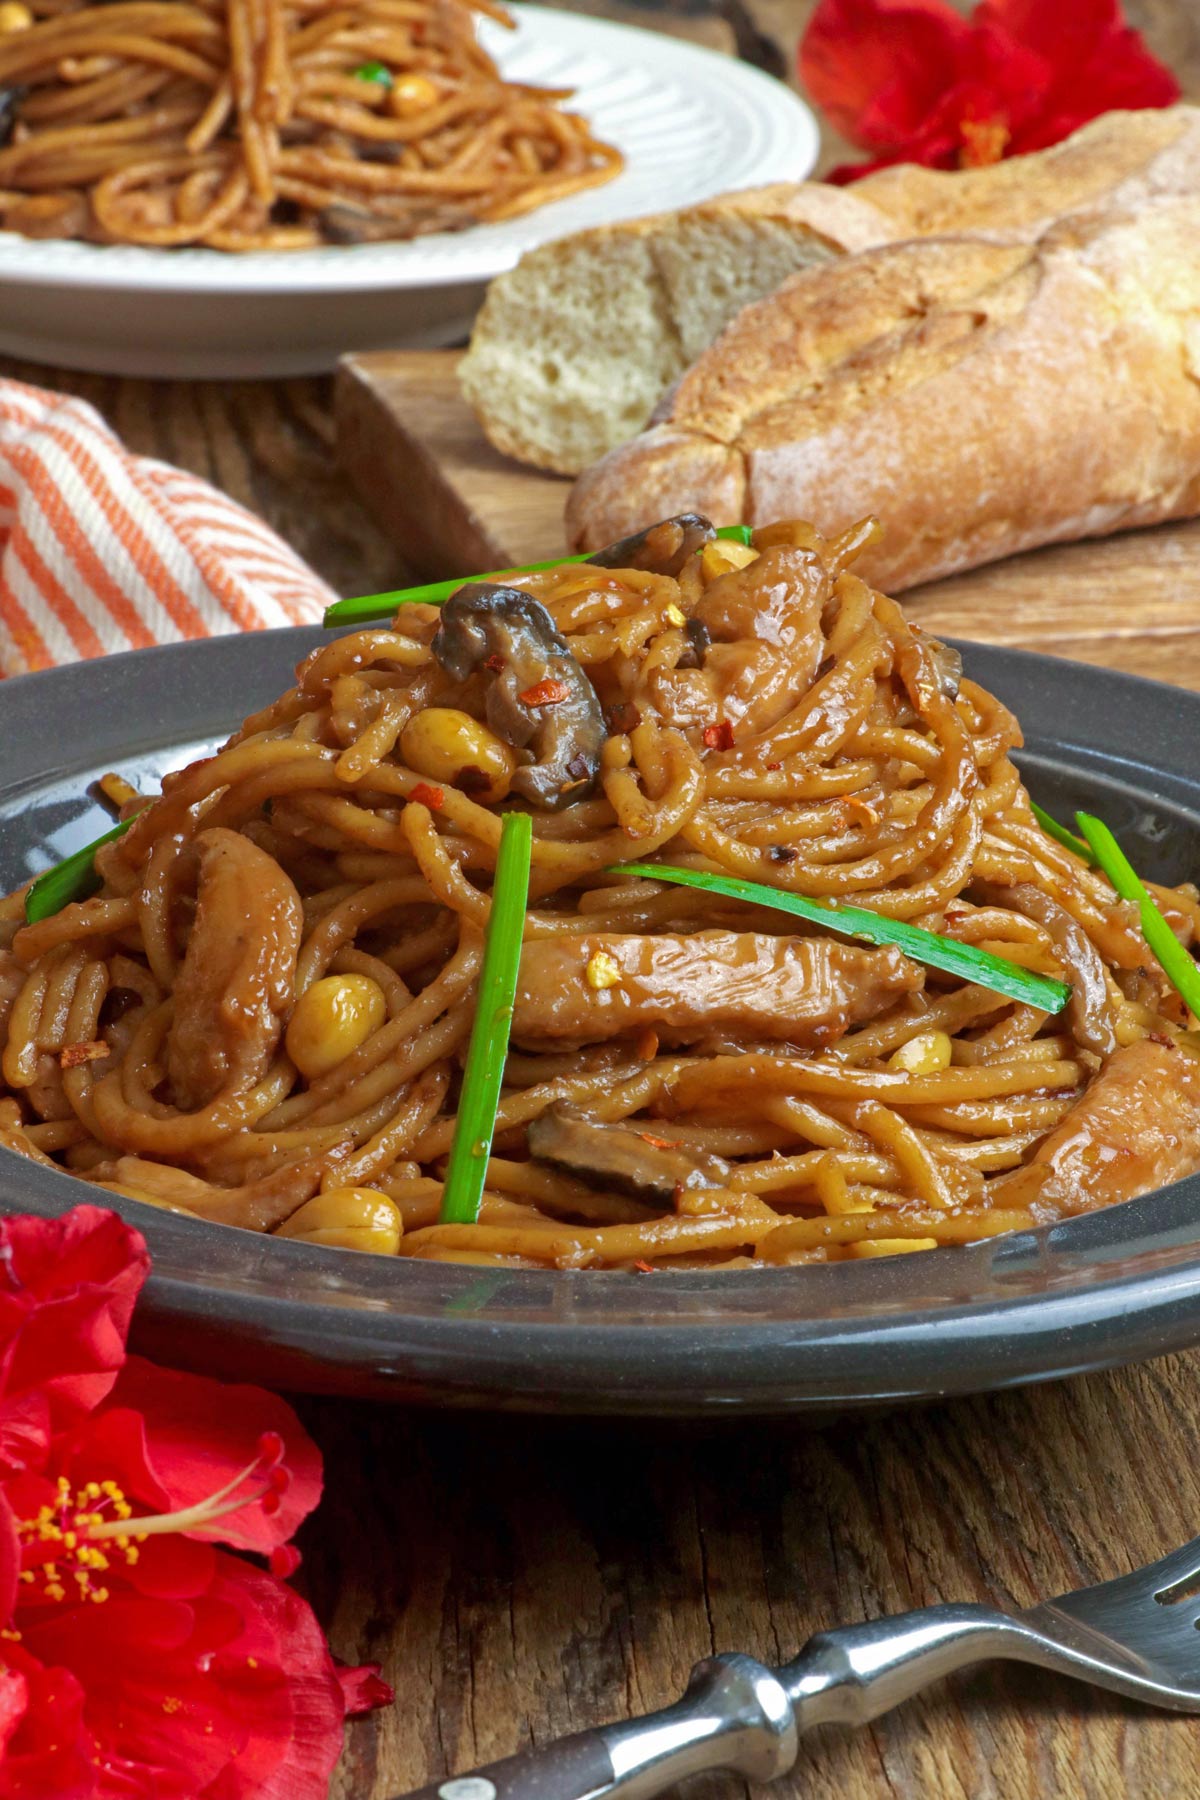 Stir-fried spaghetti in a sticky sweet, savory, and spicy sauce with chicken, mushrooms, and peanuts.